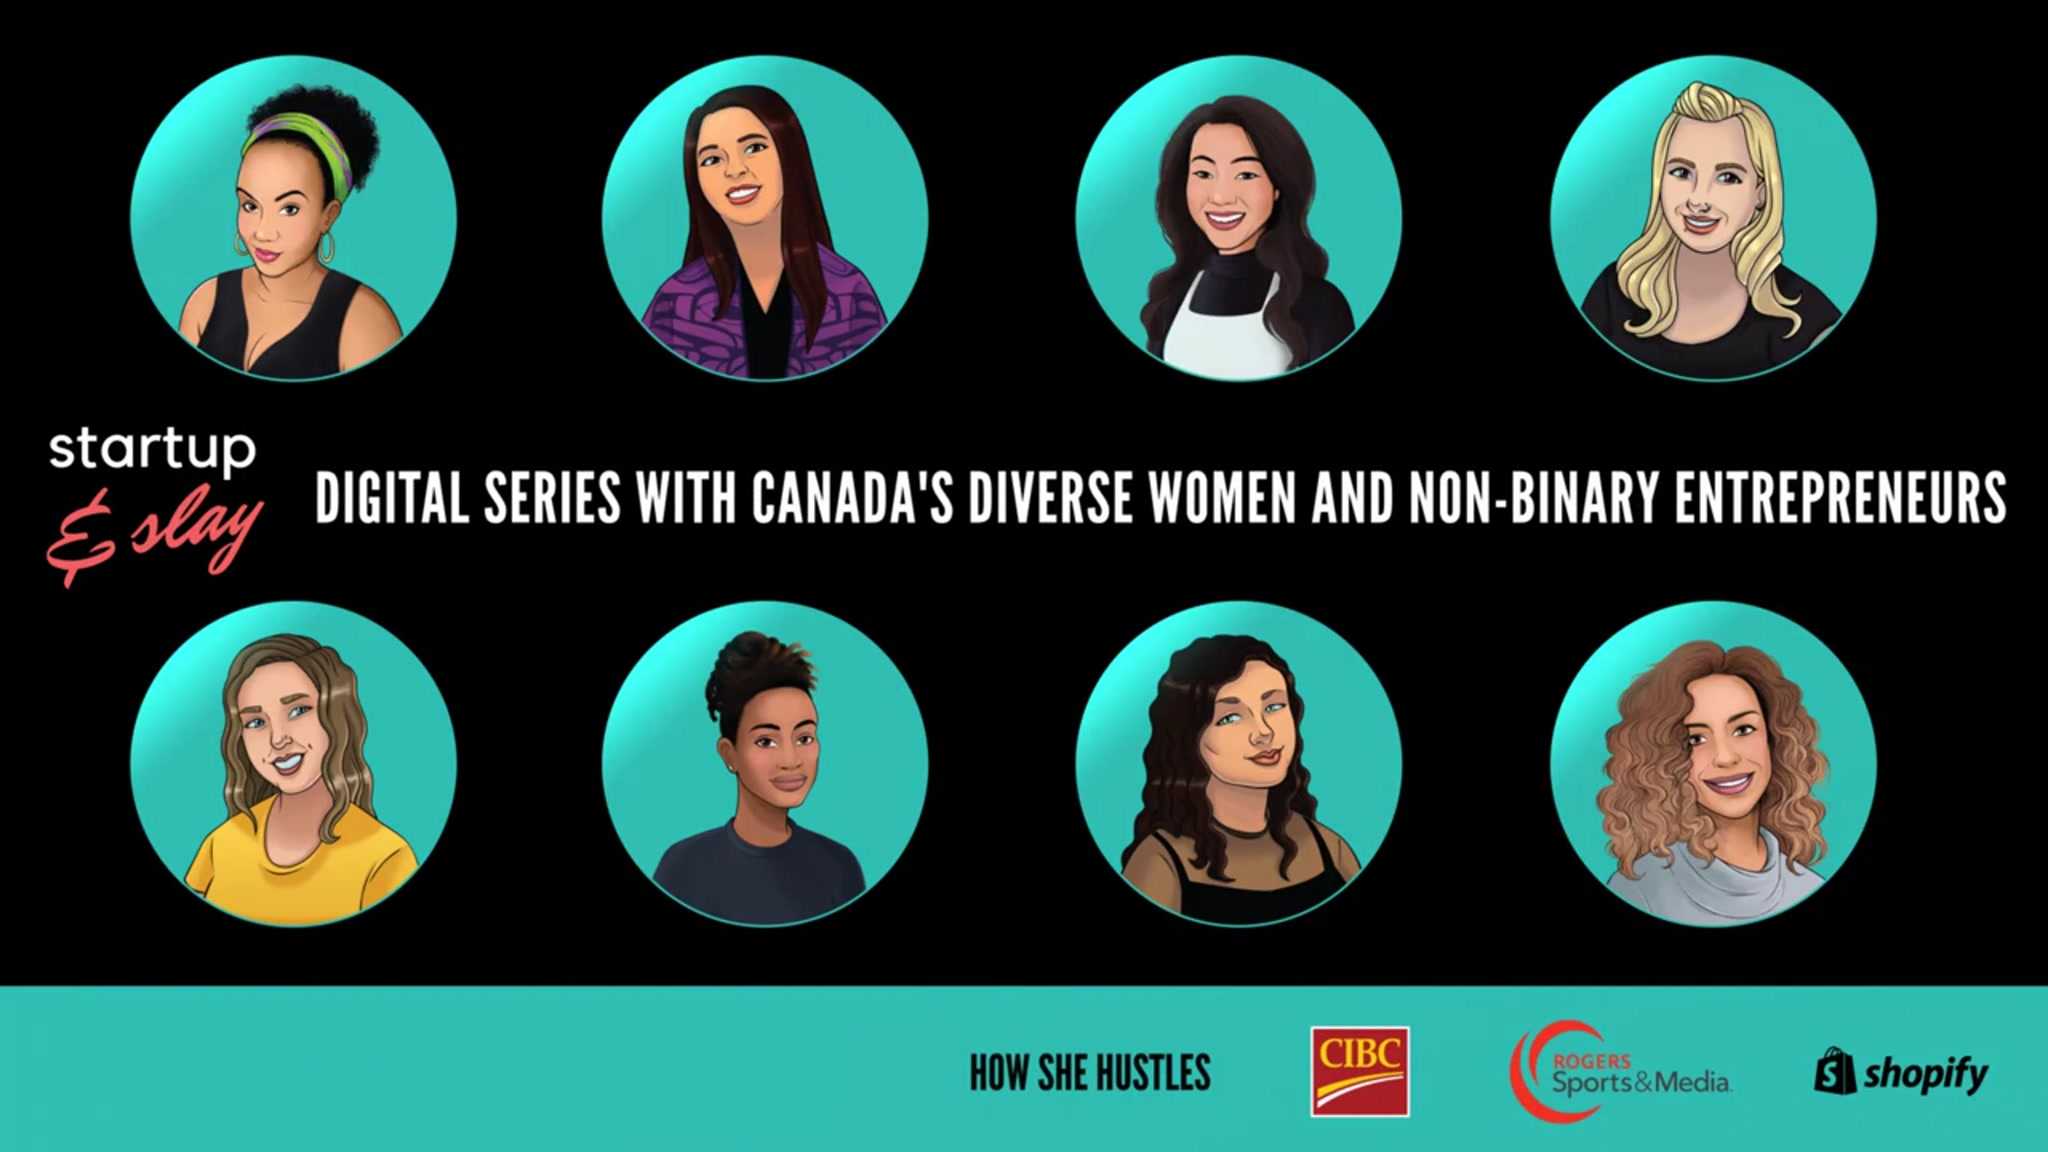 Startup & Slay 2nd Edition Digital Series Launches With 8 Diverse Canadian Women and Non-Binary Entrepreneurs